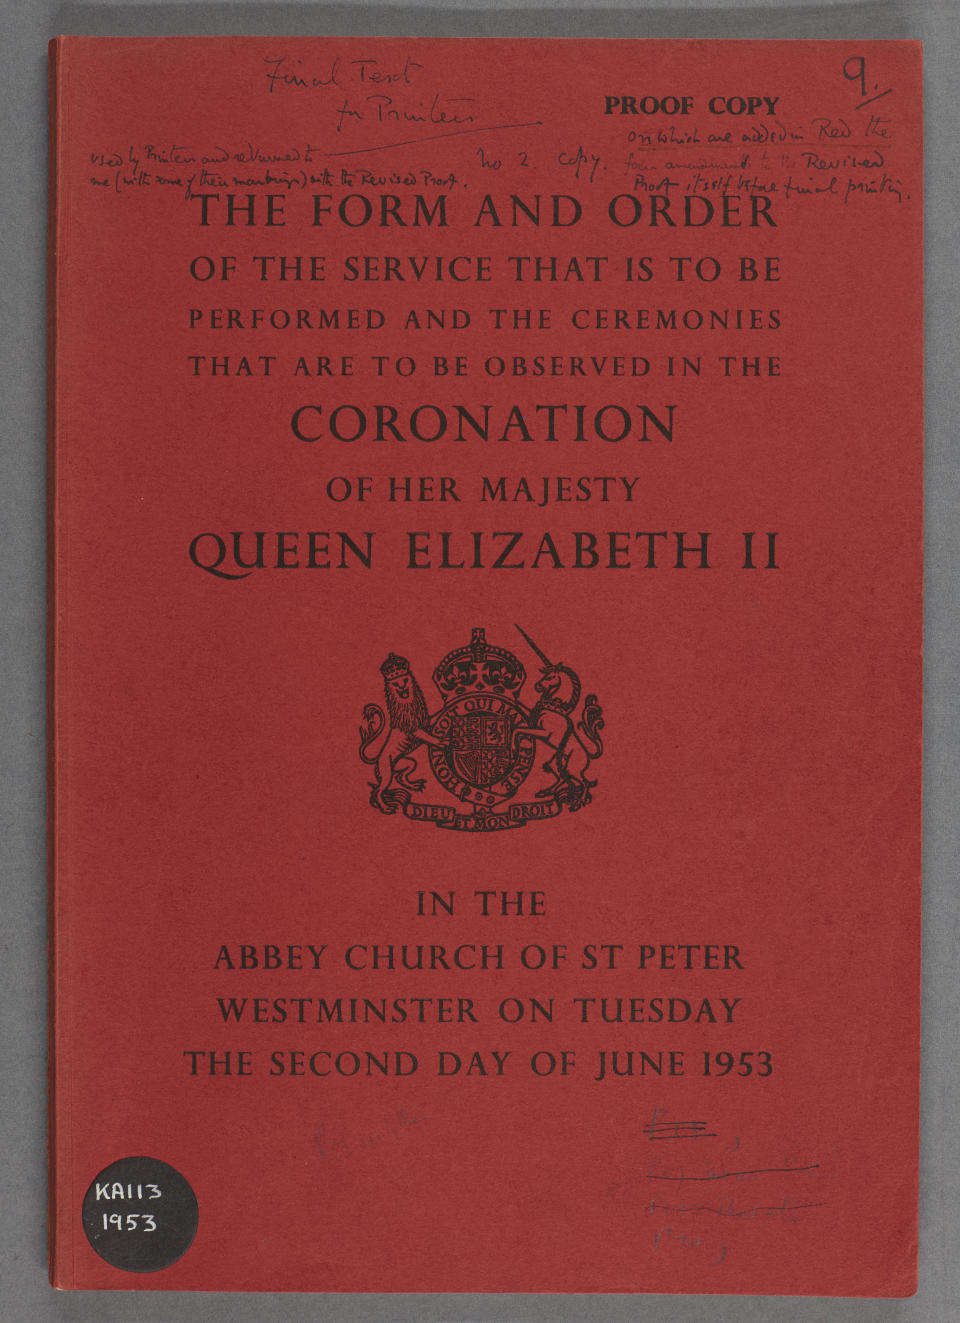 The form and order of service for the Queen’s coronation in 1953 (Church of England/PA)